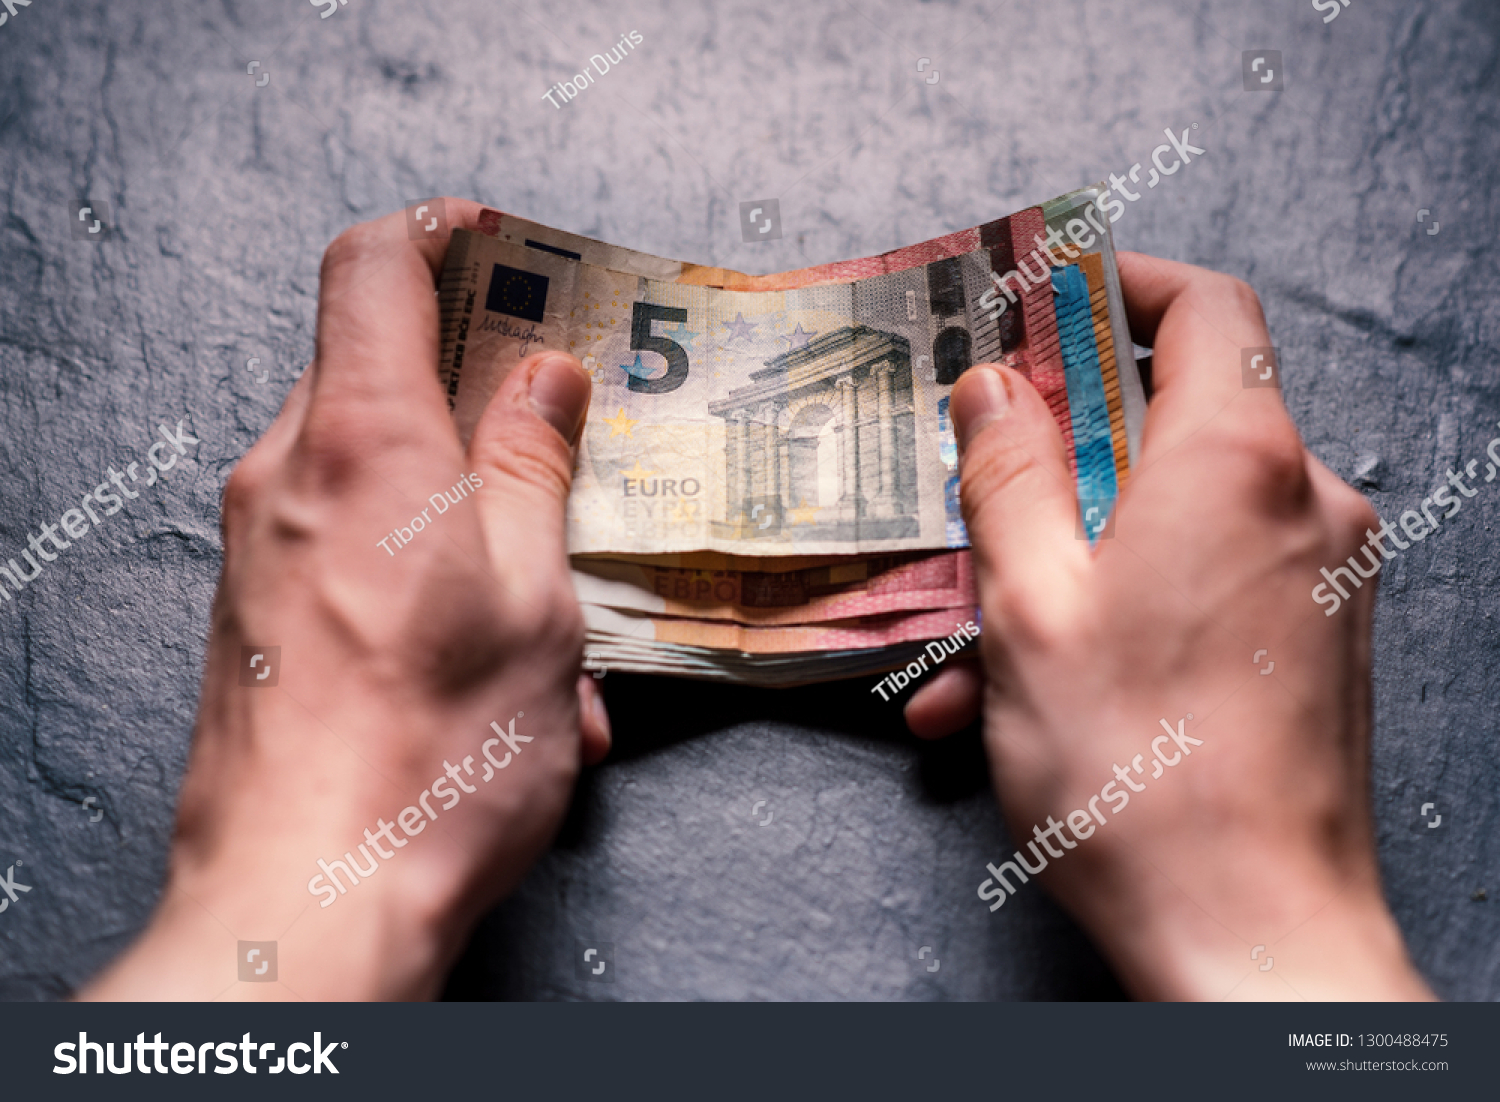 Hand´s of young man holding a money. Banknotes on a stone background. Euro money bank notes of different value. European currency - Euro. Bills of money. Man holding a bills of money.  #1300488475